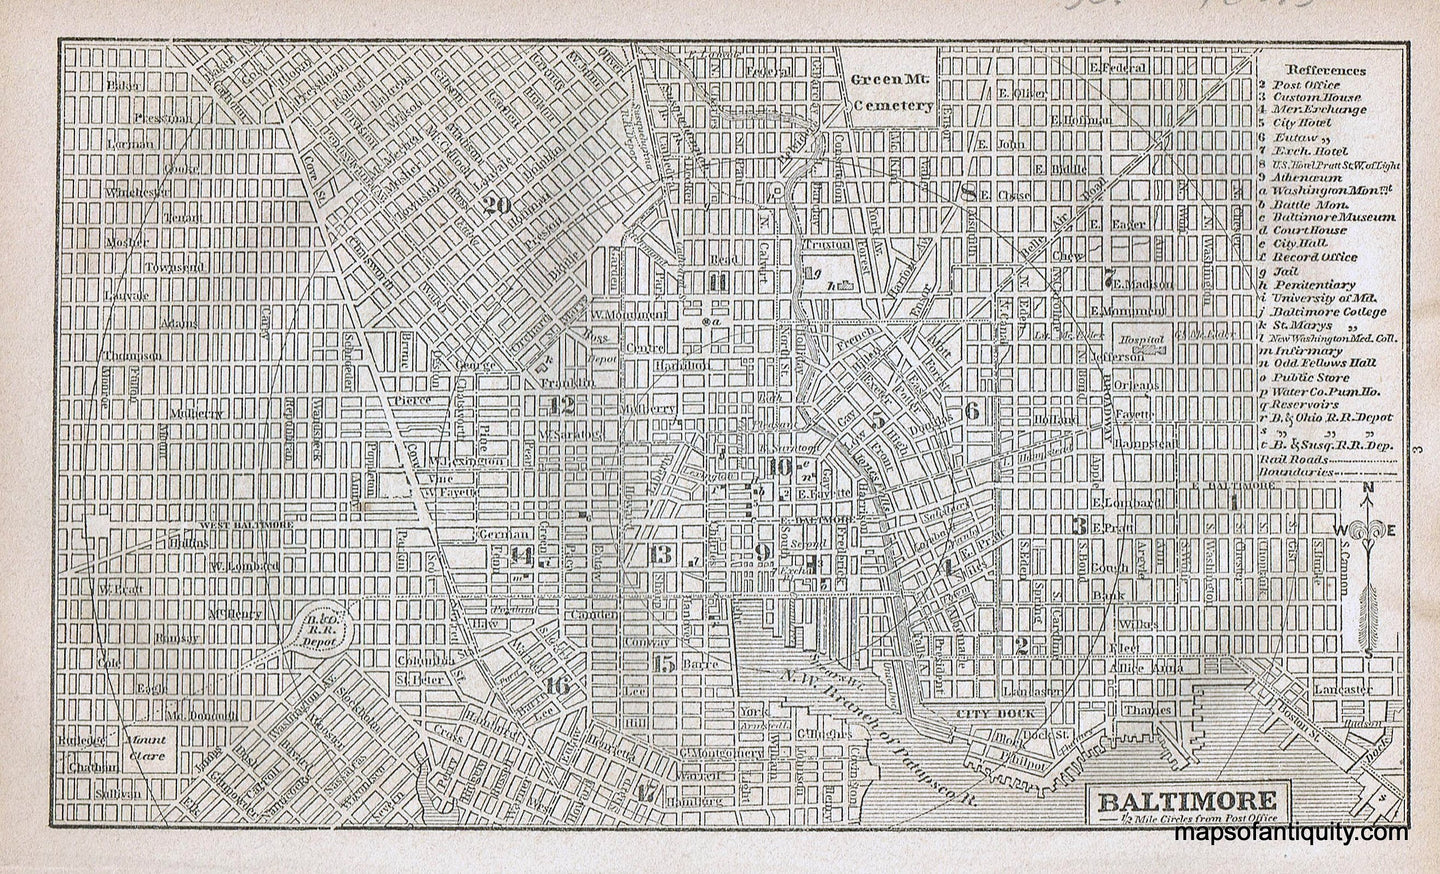 Black-and-White-Antique-Map-Baltimore-******-Baltimore--1856-Charles-C.-Savage-Maps-Of-Antiquity